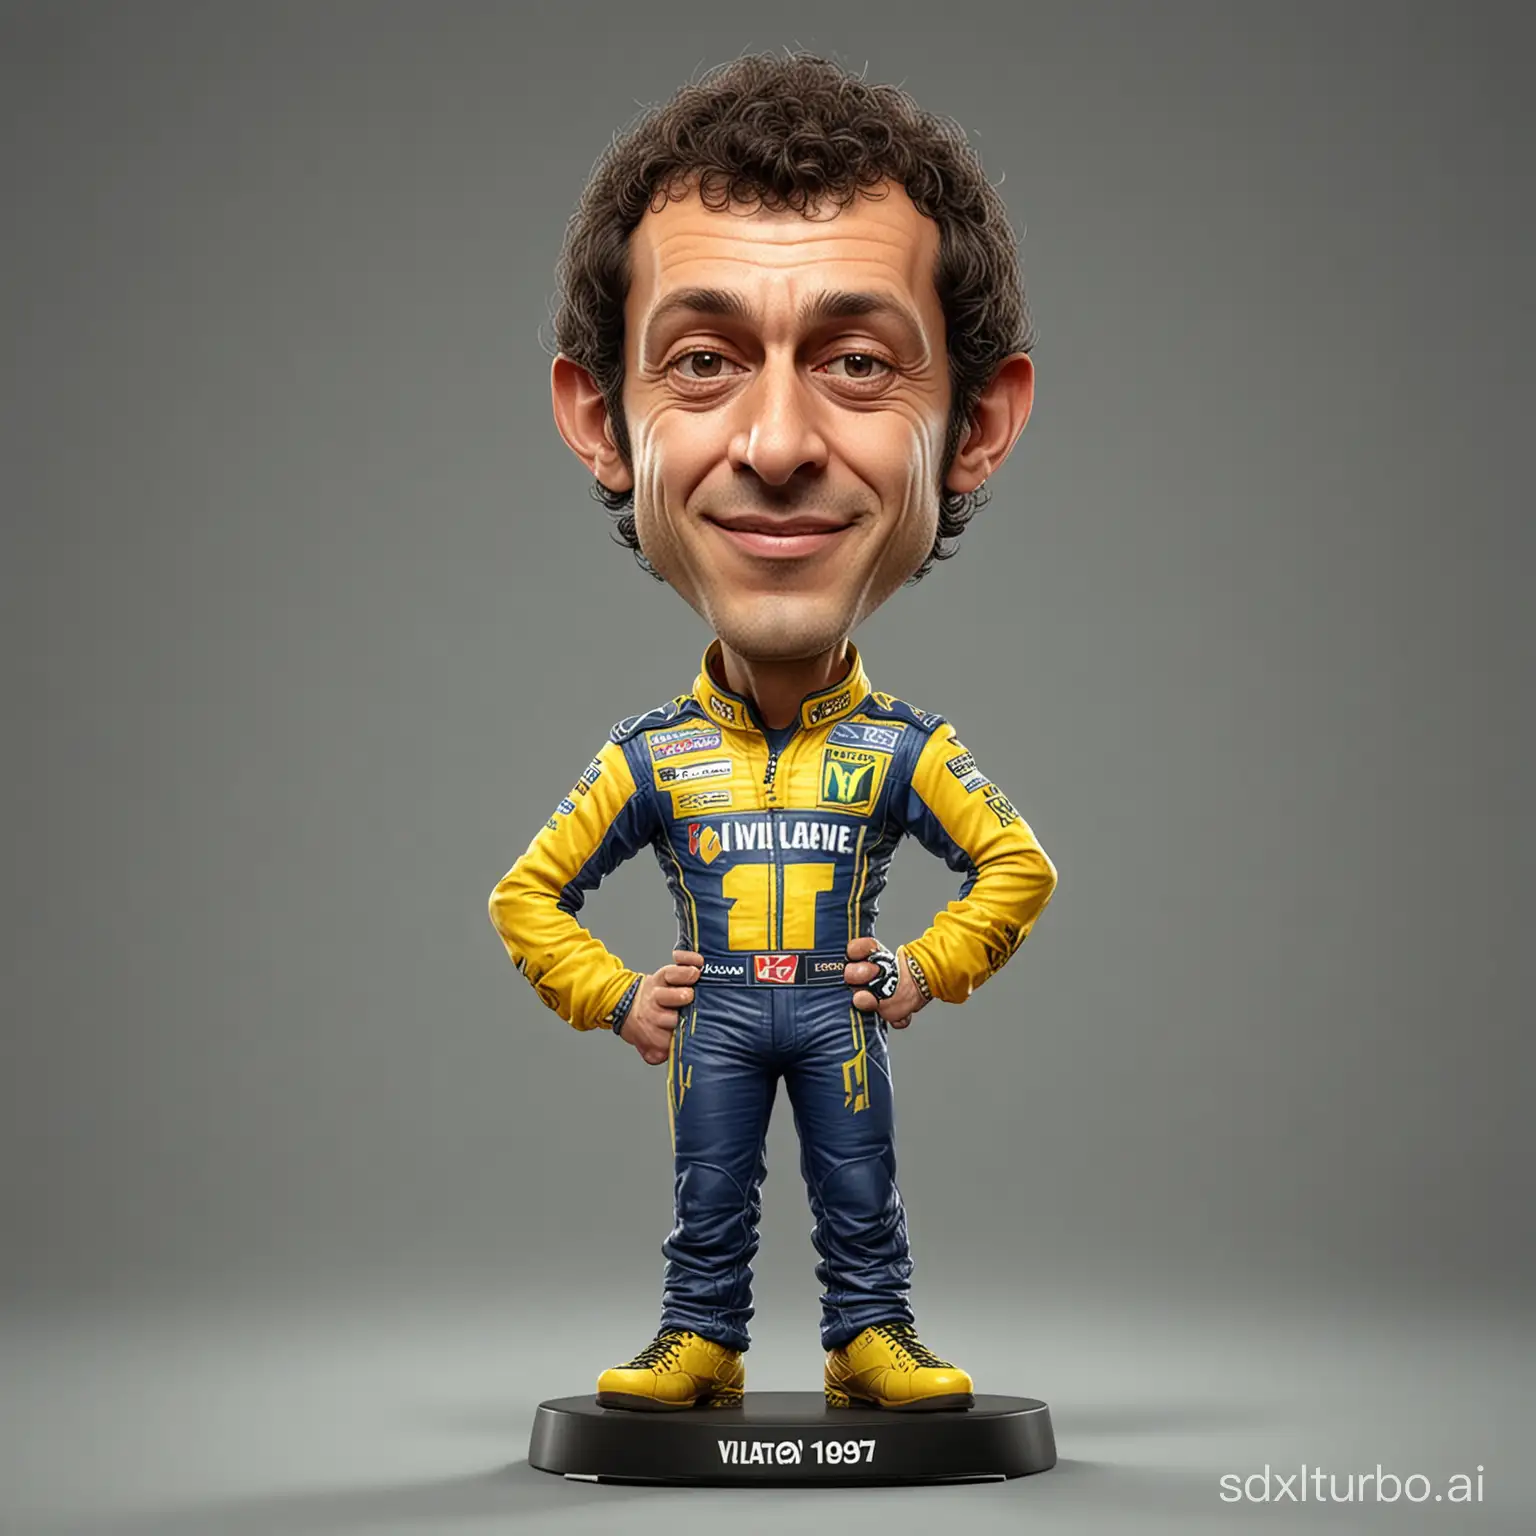 Caricature-Valentino-Rossi-Playful-Game-Character-Stands-Tall